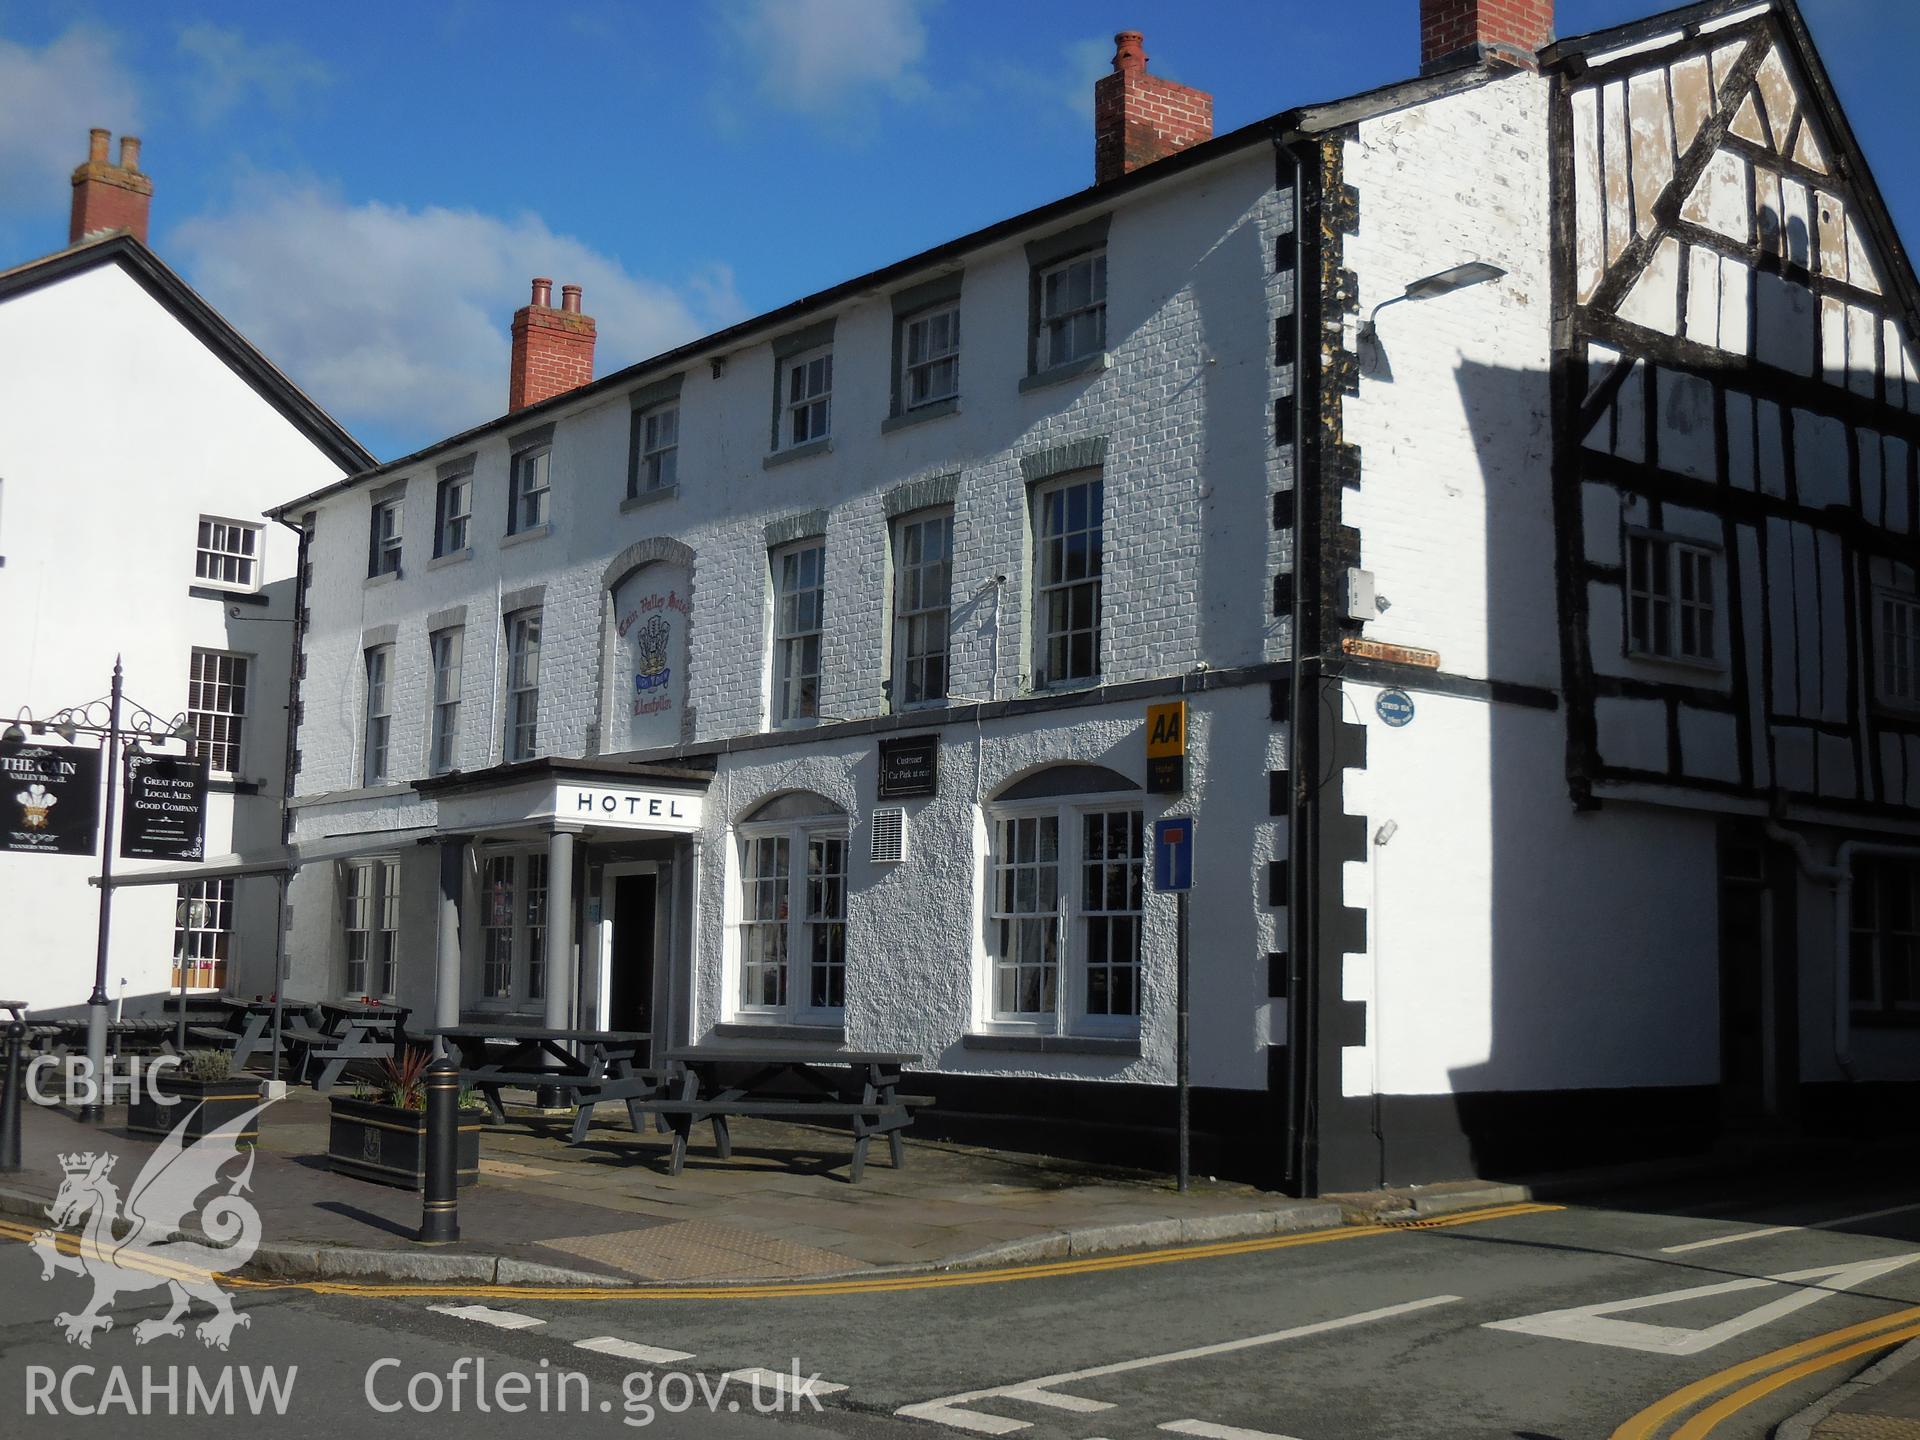 Colour digital photograph showing the Cain Valley Hotel, Llanfyllin, taken in March 2022.